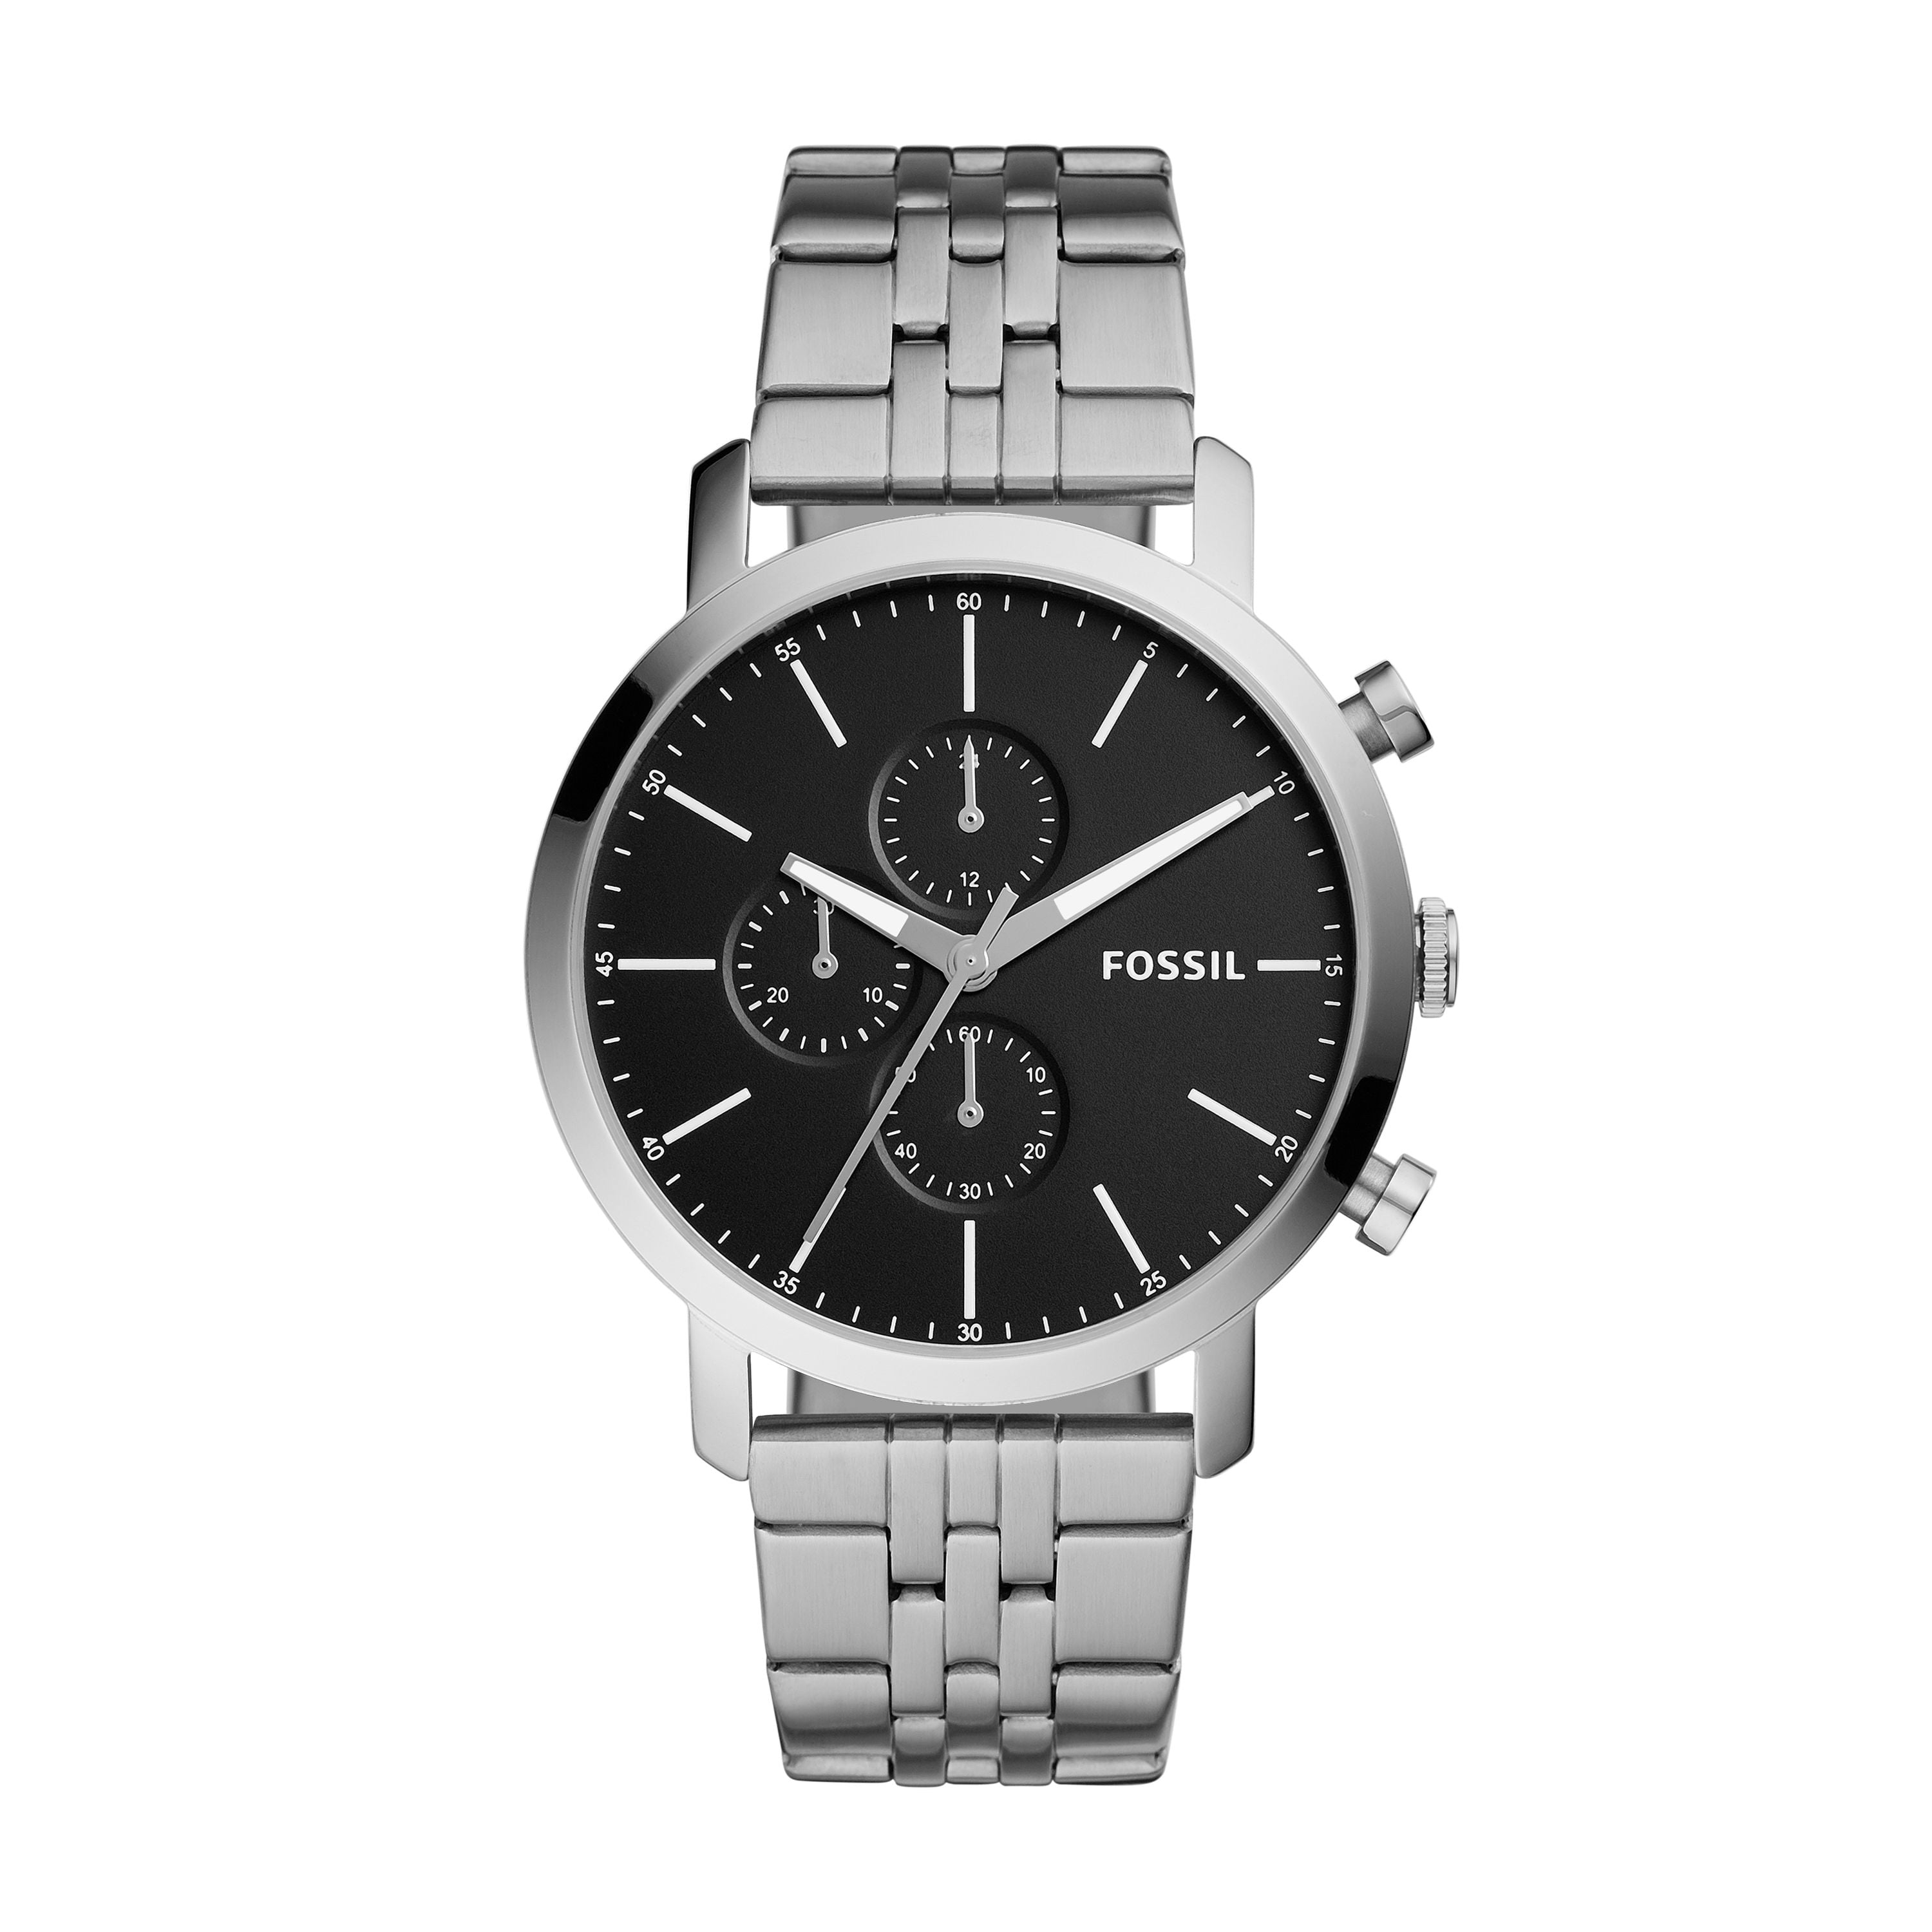 Fossil - Fossil Men's Luther Silver Tone Stainless Steel Chronograph Fossil Chronograph Stainless Steel Watch